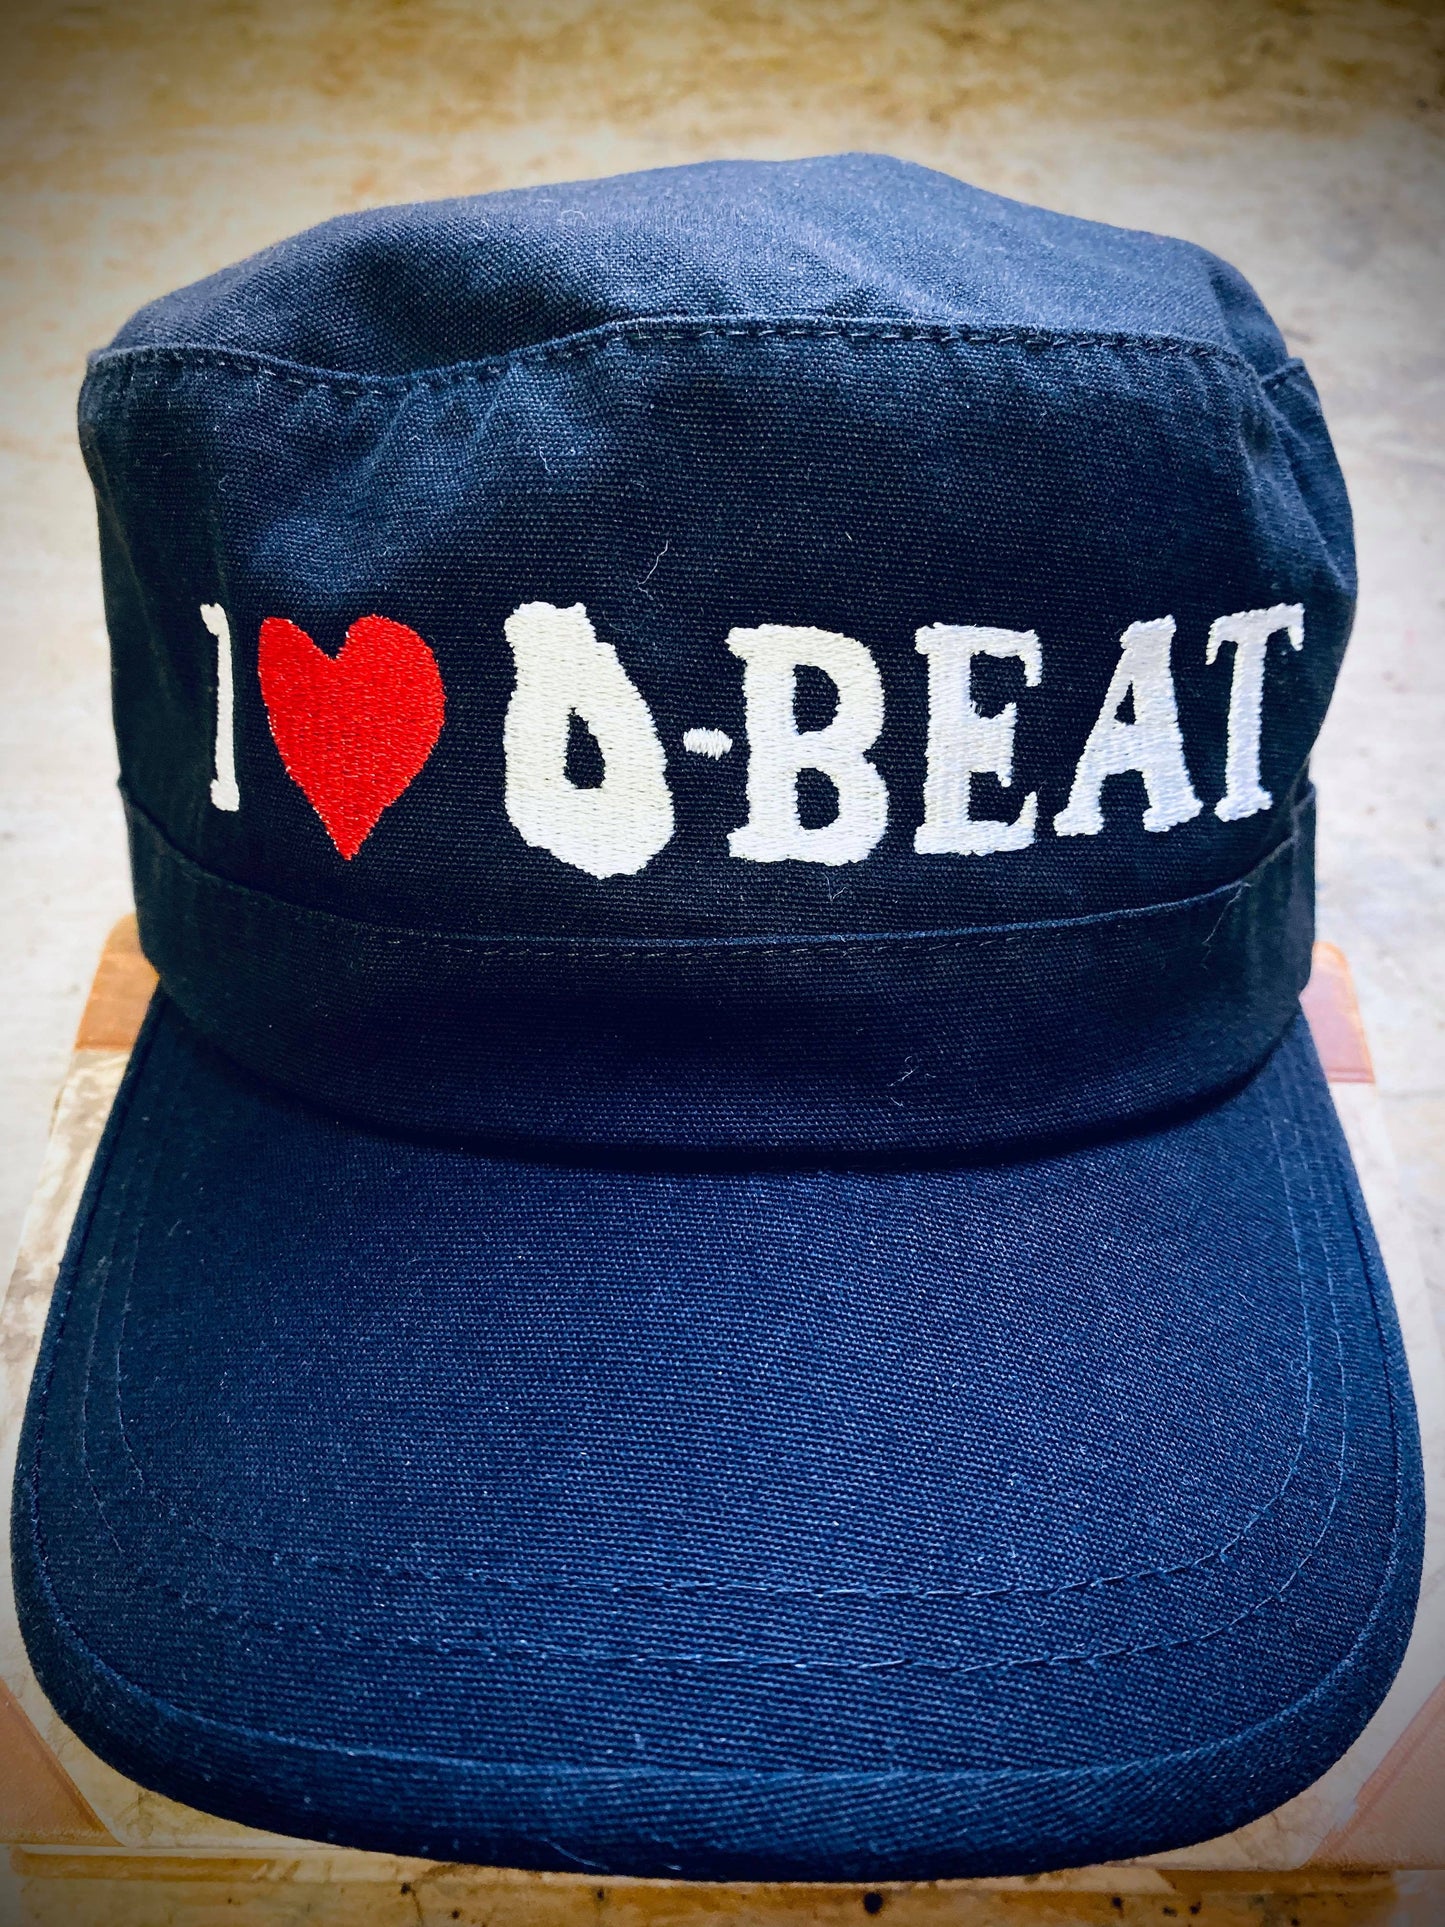 I Love D-beat Military Cap by Insane//Phobia embroidery